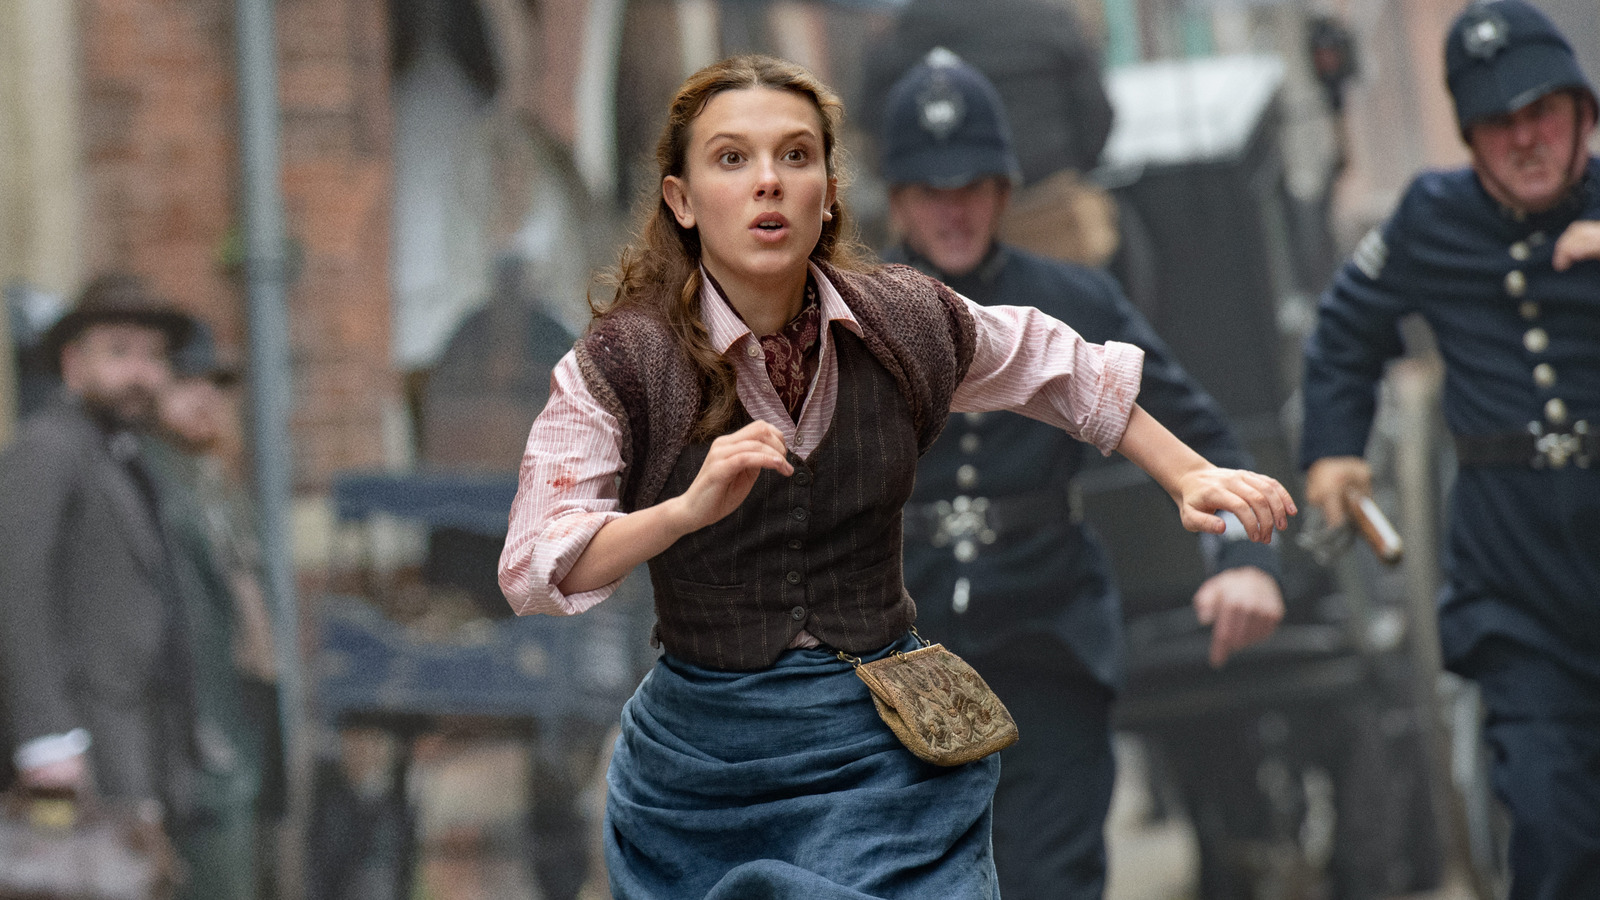 Millie Bobby Brown On Enola Holmes 2 Upgrade, Be Different From Eleven, And Give Enola Agency [Exclusive Interview]